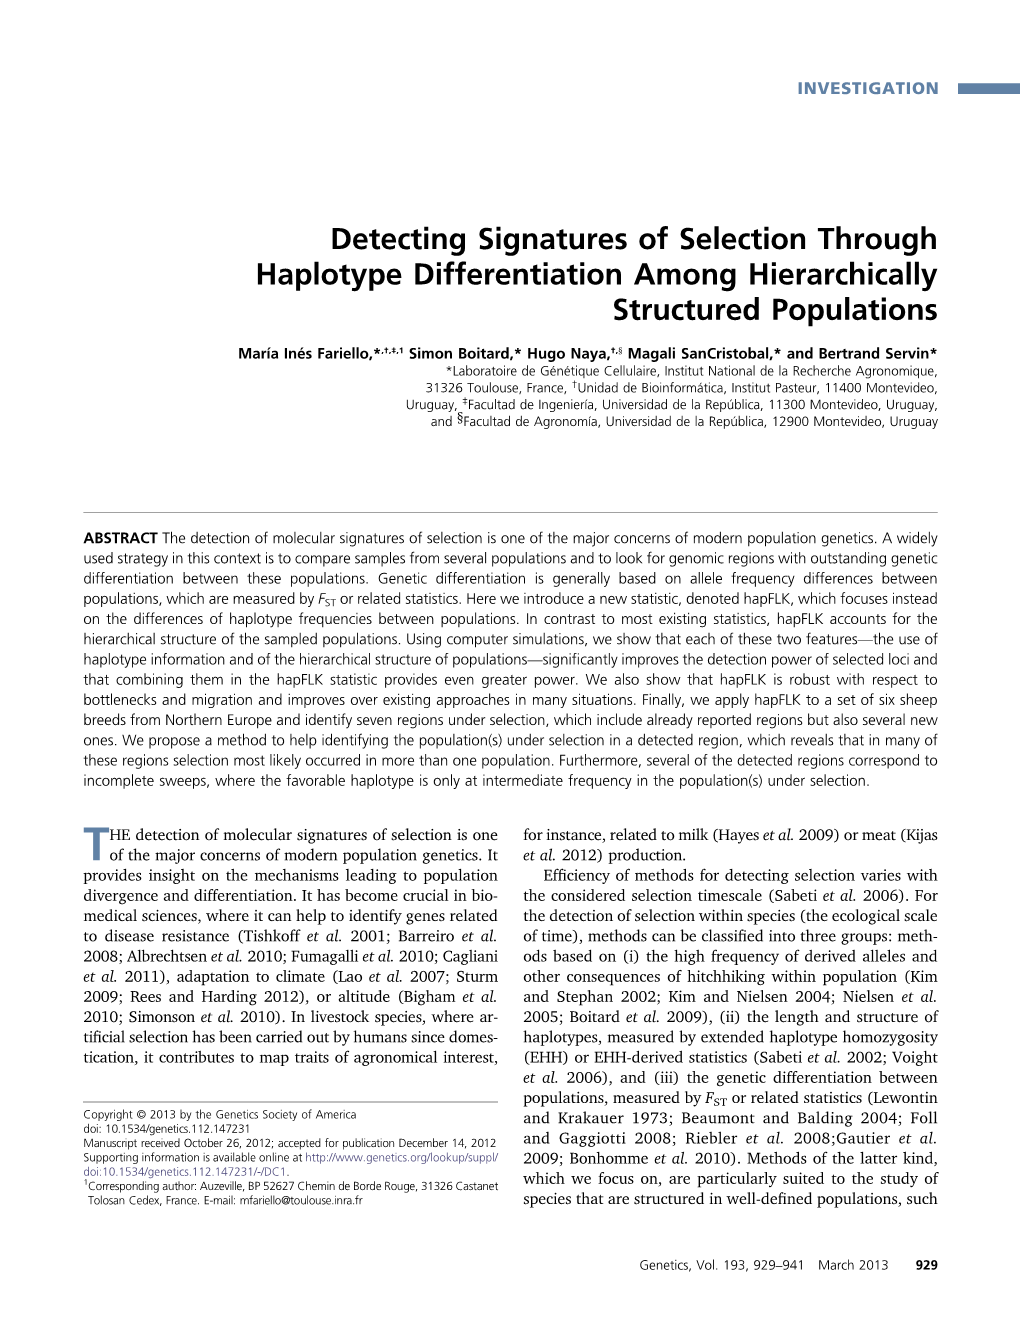 Detecting Signatures of Selection Through Haplotype Differentiation Among Hierarchically Structured Populations